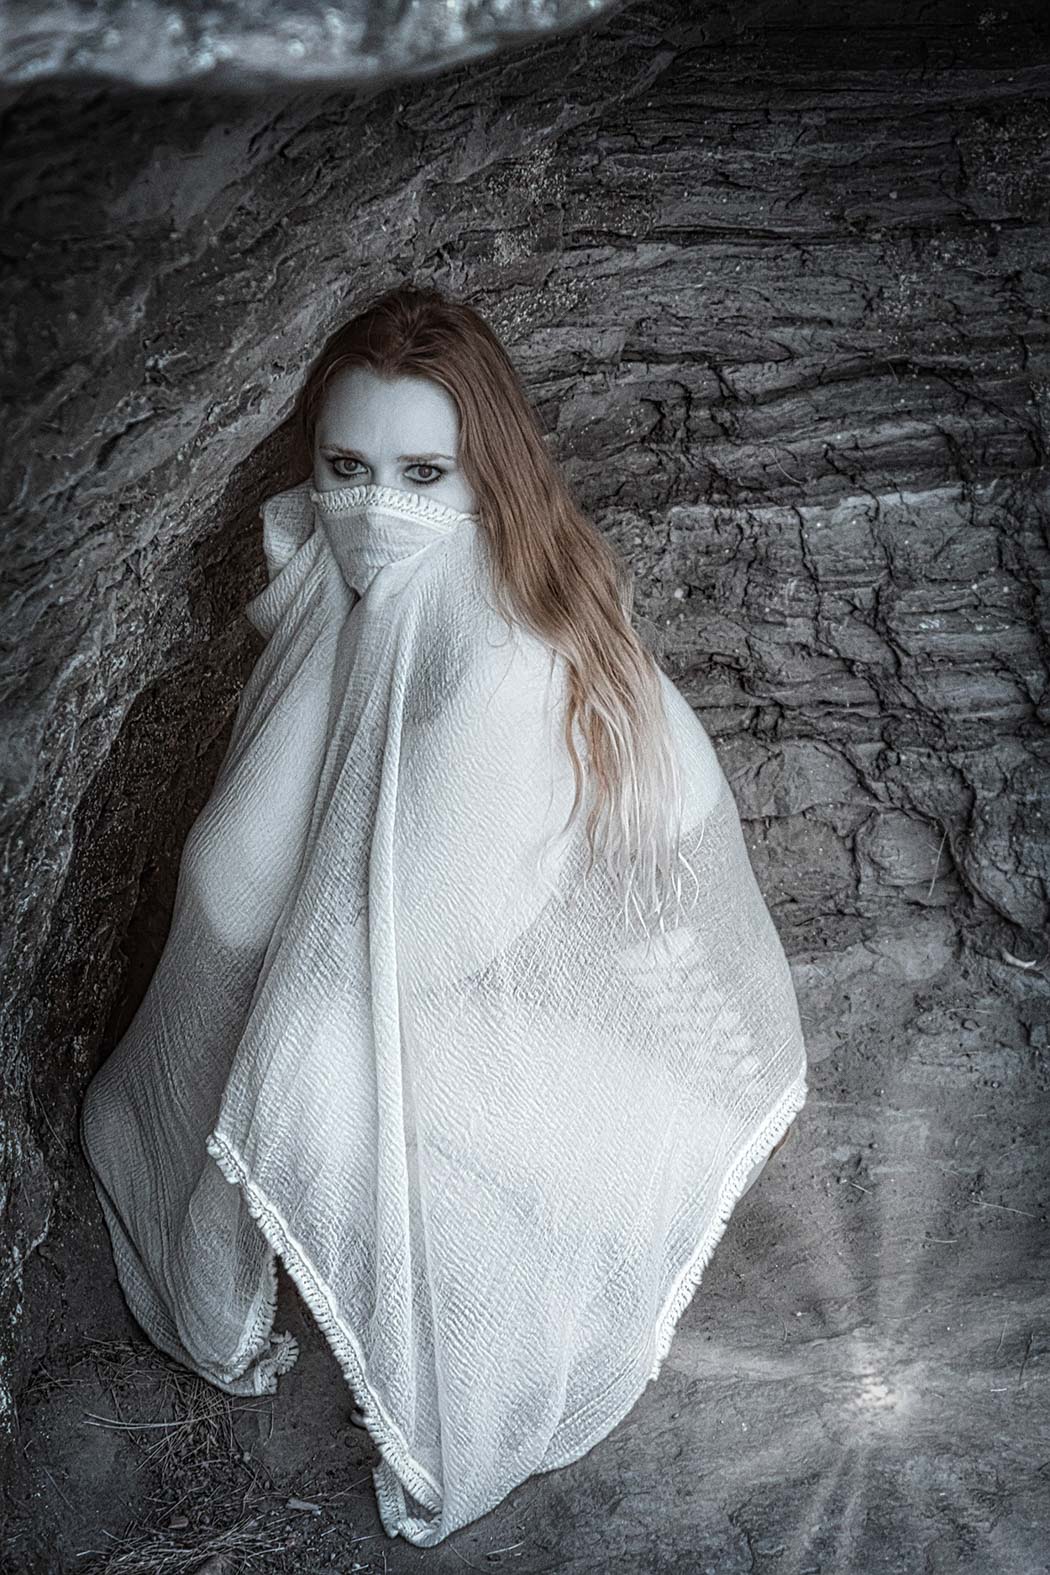 Portrait of a woman wearing a white blanket on a cave